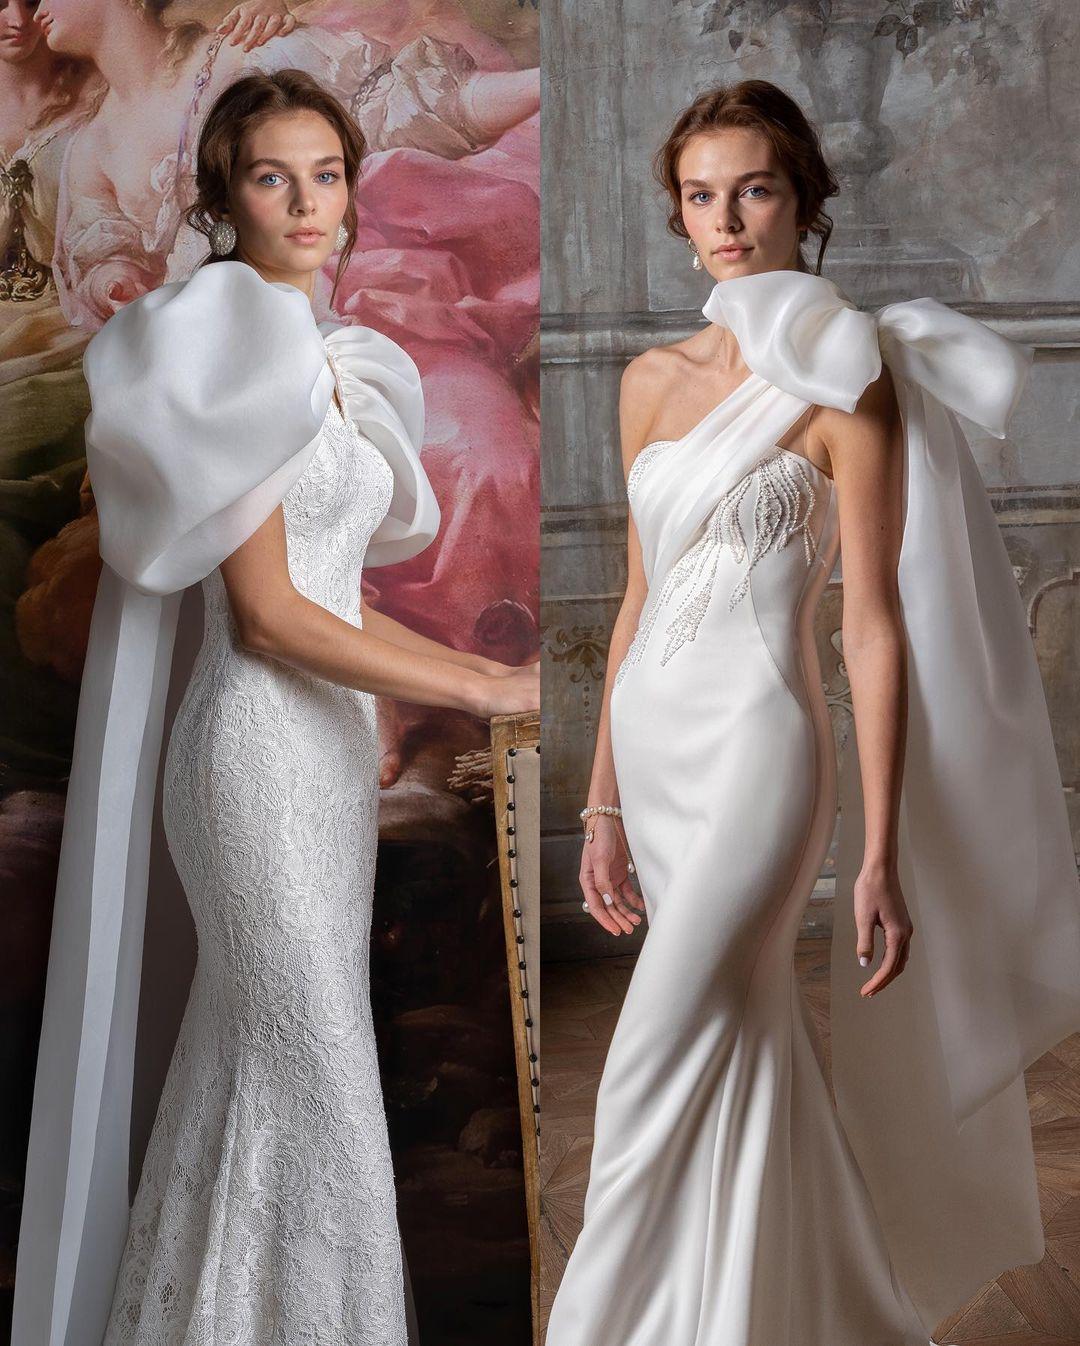 class="content__text"
 Selection of elegant and laconic mermaid-style wedding gowns 🤍 
 